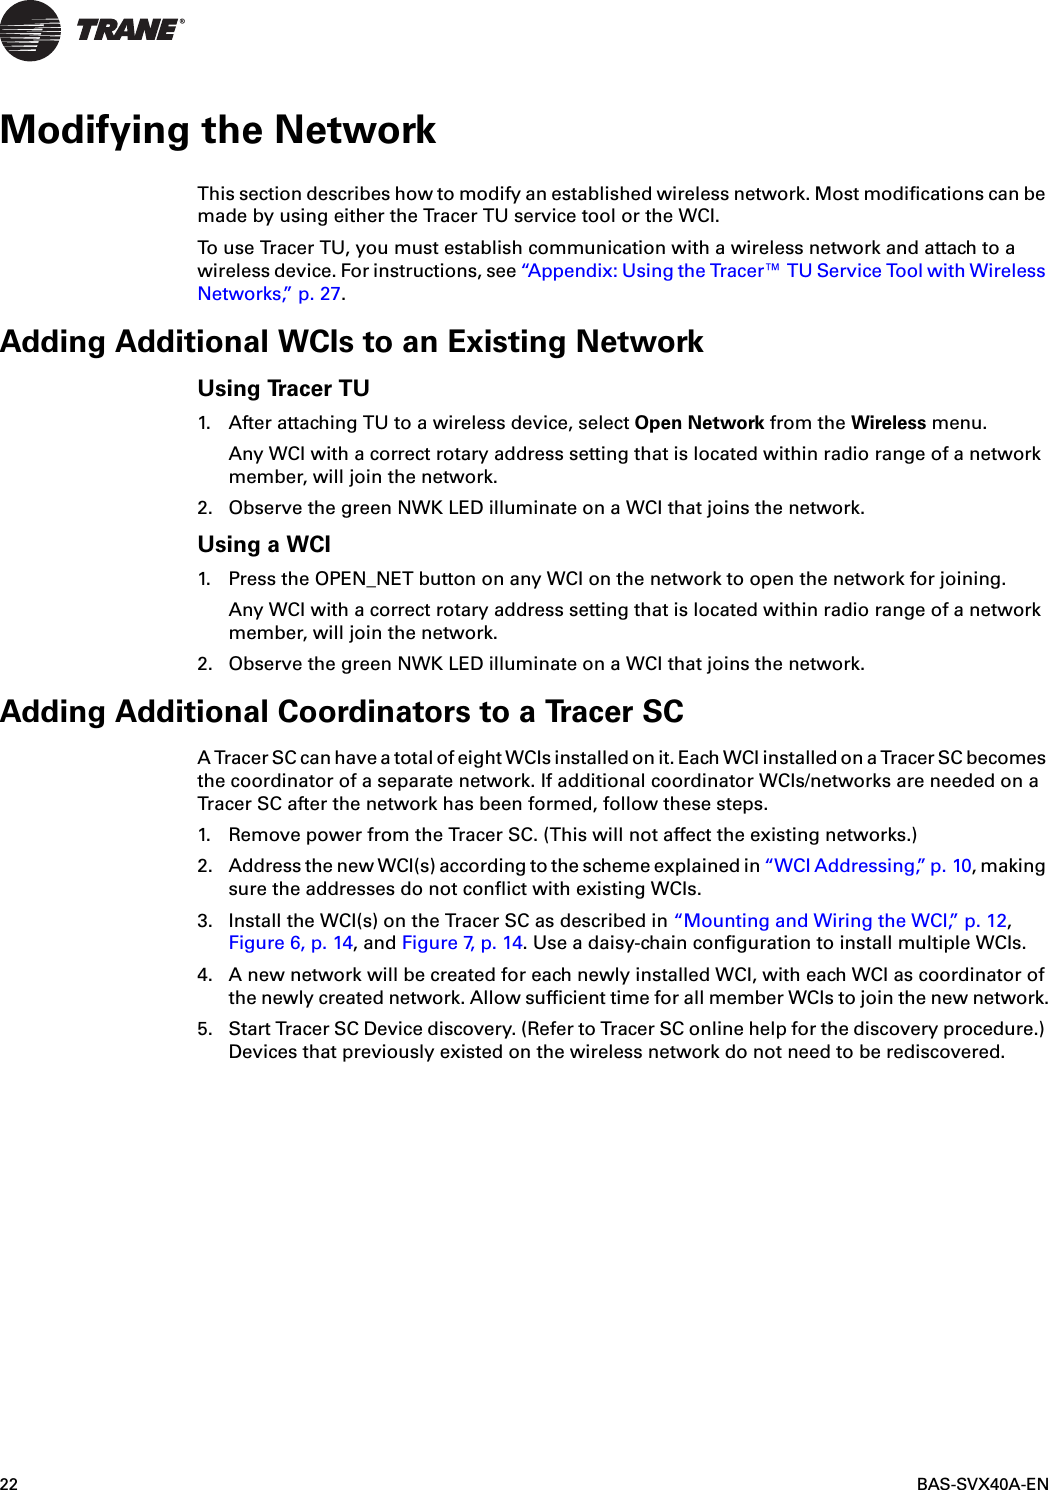 22 BAS-SVX40A-ENModifying the NetworkThis section describes how to modify an established wireless network. Most modifications can be made by using either the Tracer TU service tool or the WCI.To use Tracer TU, you must establish communication with a wireless network and attach to a wireless device. For instructions, see “Appendix: Using the Tracer™ TU Service Tool with Wireless Networks,” p. 27.Adding Additional WCIs to an Existing NetworkUsing Tracer TU1. After attaching TU to a wireless device, select Open Network from the Wireless menu.Any WCI with a correct rotary address setting that is located within radio range of a network member, will join the network.2. Observe the green NWK LED illuminate on a WCI that joins the network.Using a WCI1. Press the OPEN_NET button on any WCI on the network to open the network for joining.Any WCI with a correct rotary address setting that is located within radio range of a network member, will join the network.2. Observe the green NWK LED illuminate on a WCI that joins the network.Adding Additional Coordinators to a Tracer SC A Tracer SC can have a total of eight WCIs installed on it. Each WCI installed on a Tracer SC becomes the coordinator of a separate network. If additional coordinator WCIs/networks are needed on a Tracer SC after the network has been formed, follow these steps.1. Remove power from the Tracer SC. (This will not affect the existing networks.)2. Address the new WCI(s) according to the scheme explained in “WCI Addressing,” p. 10, making sure the addresses do not conflict with existing WCIs.3. Install the WCI(s) on the Tracer SC as described in “Mounting and Wiring the WCI,” p. 12, Figure 6, p. 14, and Figure 7,  p .  14. Use a daisy-chain configuration to install multiple WCIs.4. A new network will be created for each newly installed WCI, with each WCI as coordinator of the newly created network. Allow sufficient time for all member WCIs to join the new network.5. Start Tracer SC Device discovery. (Refer to Tracer SC online help for the discovery procedure.) Devices that previously existed on the wireless network do not need to be rediscovered.